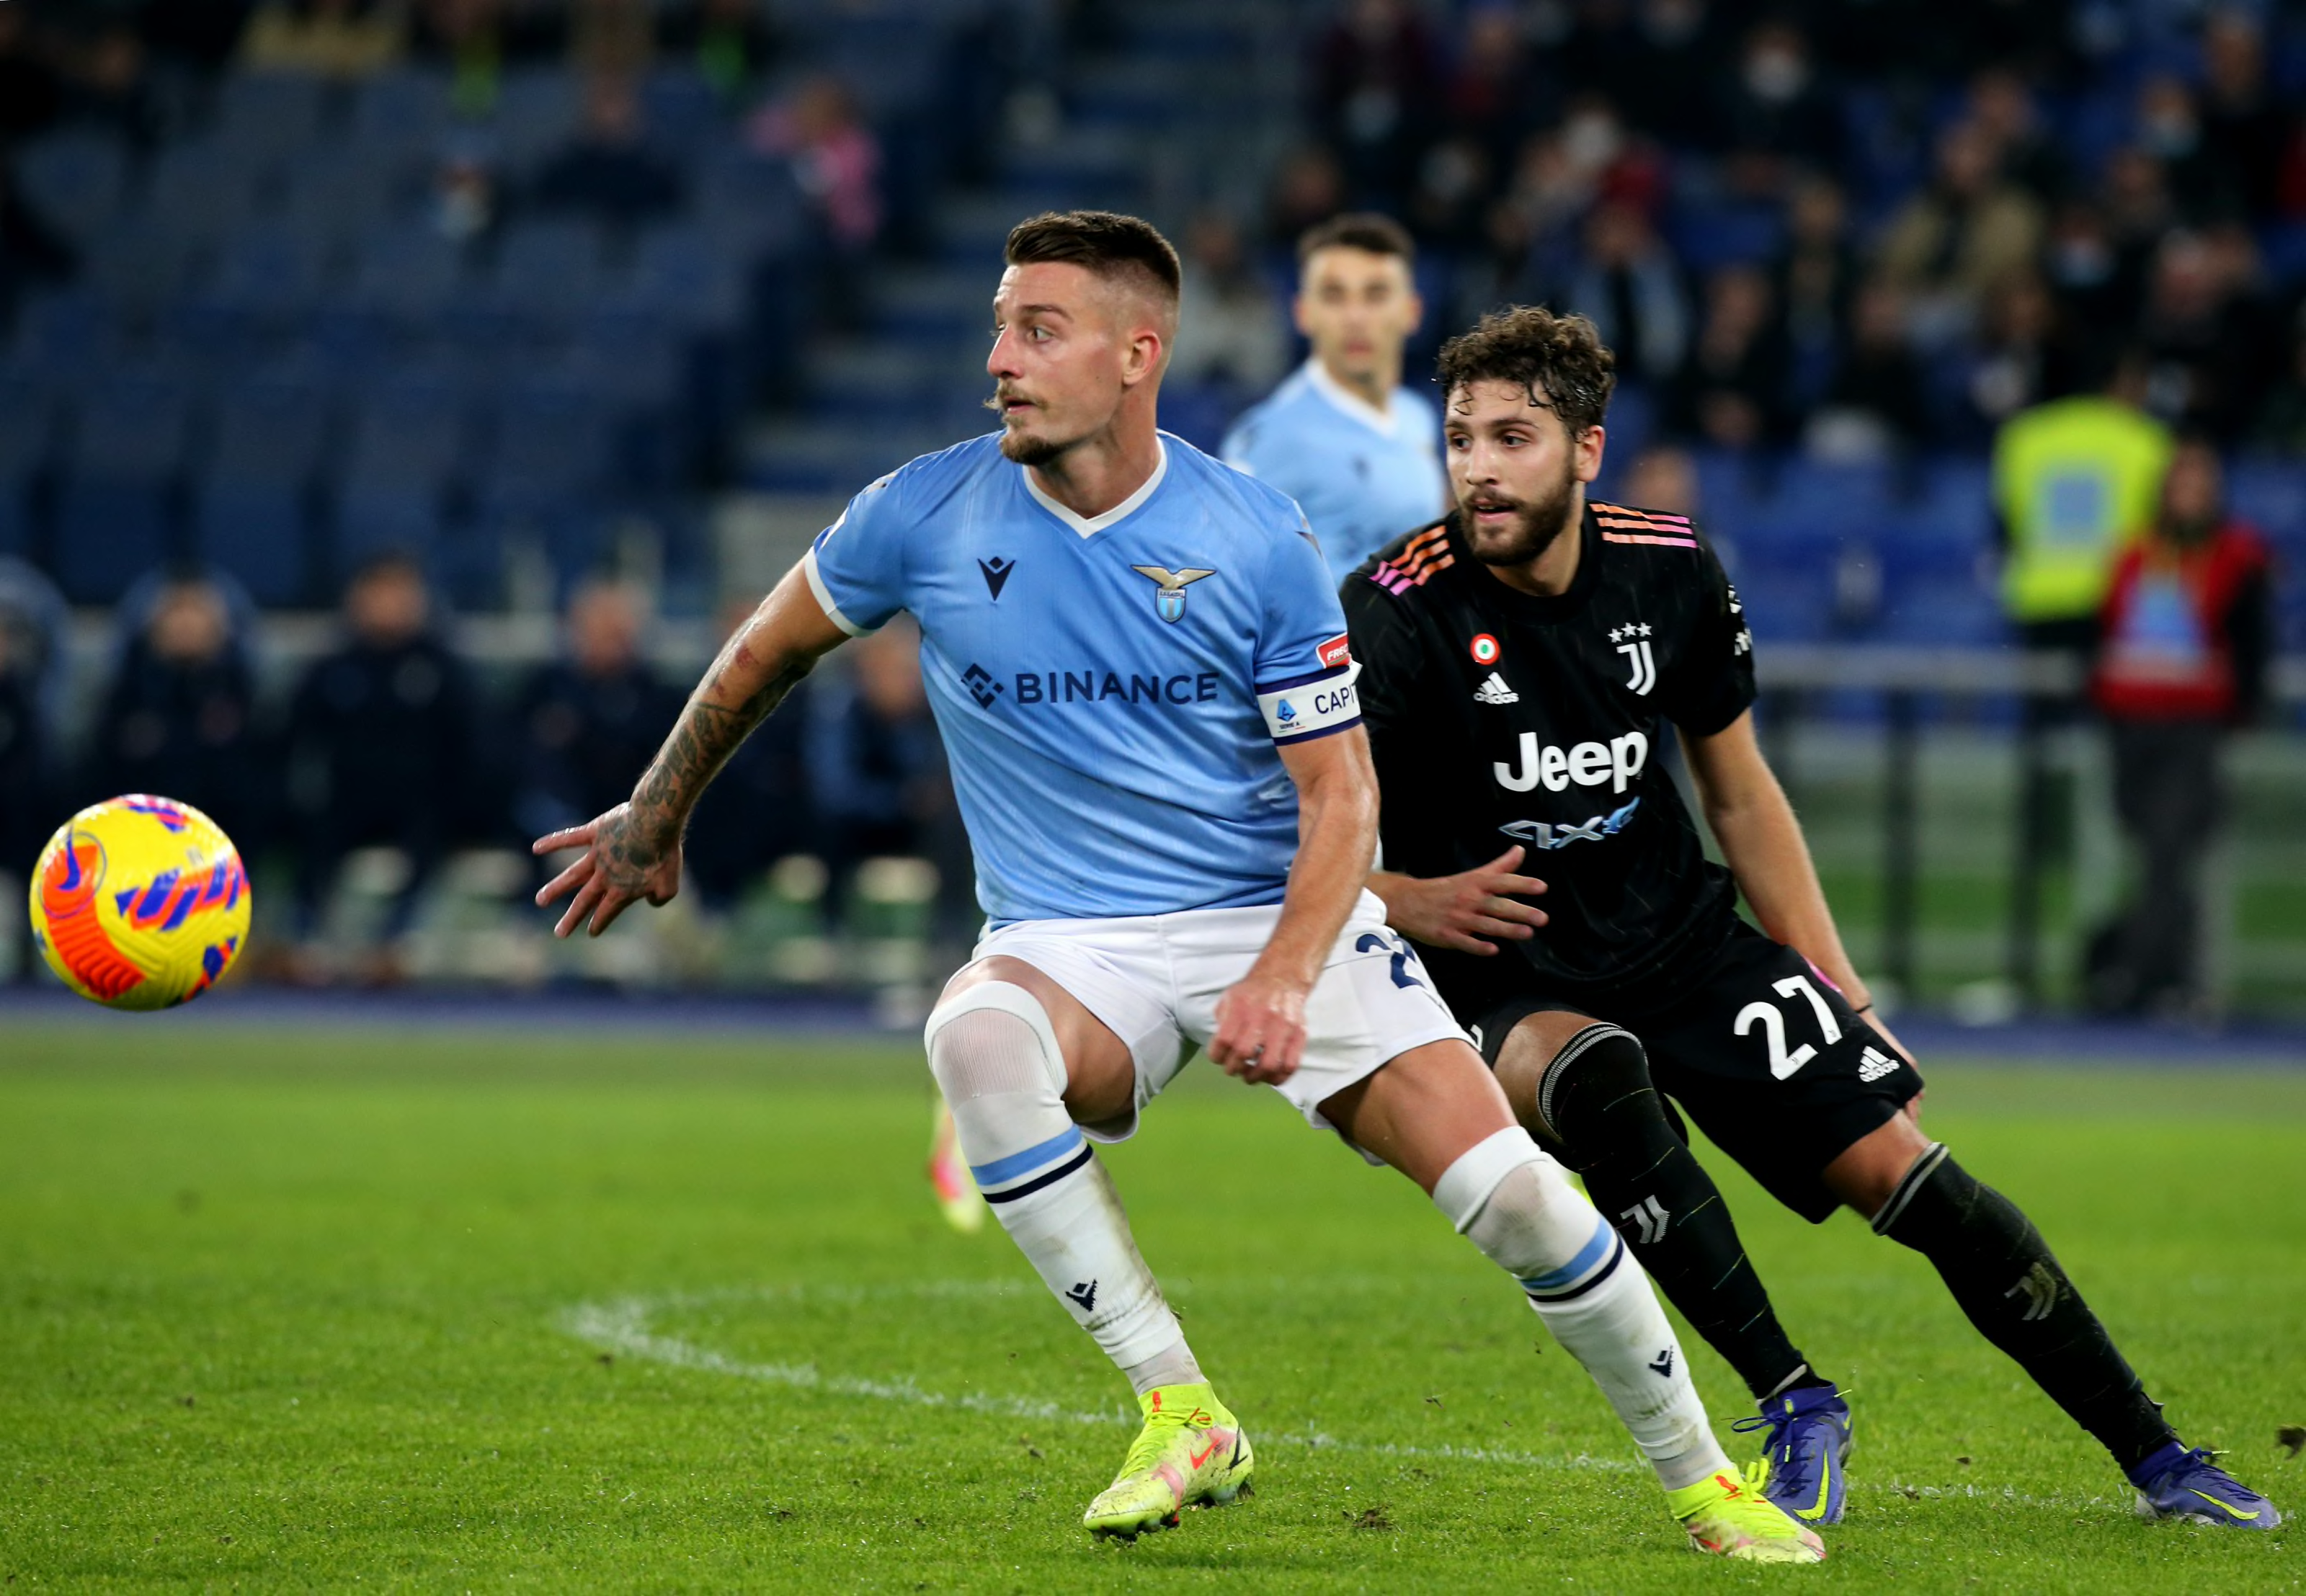 Juventus vs Lazio Preview: How to Watch, Team News & Prediction